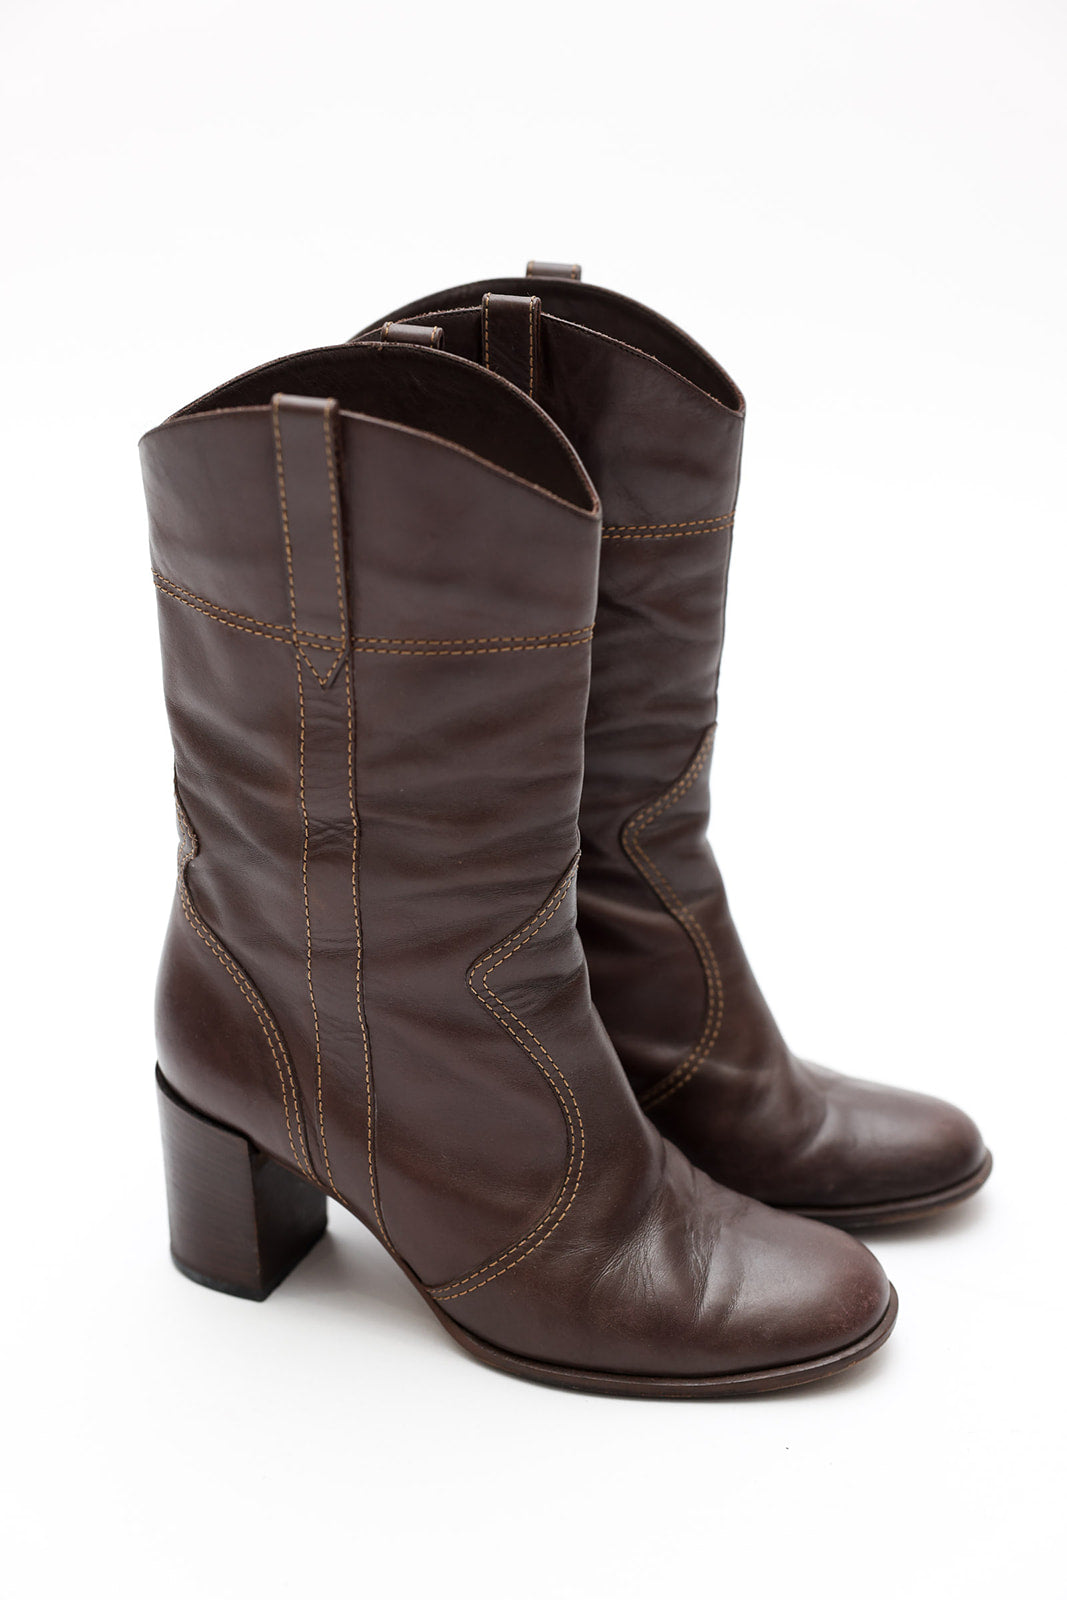 Marc Jacobs Brown Leather Boot